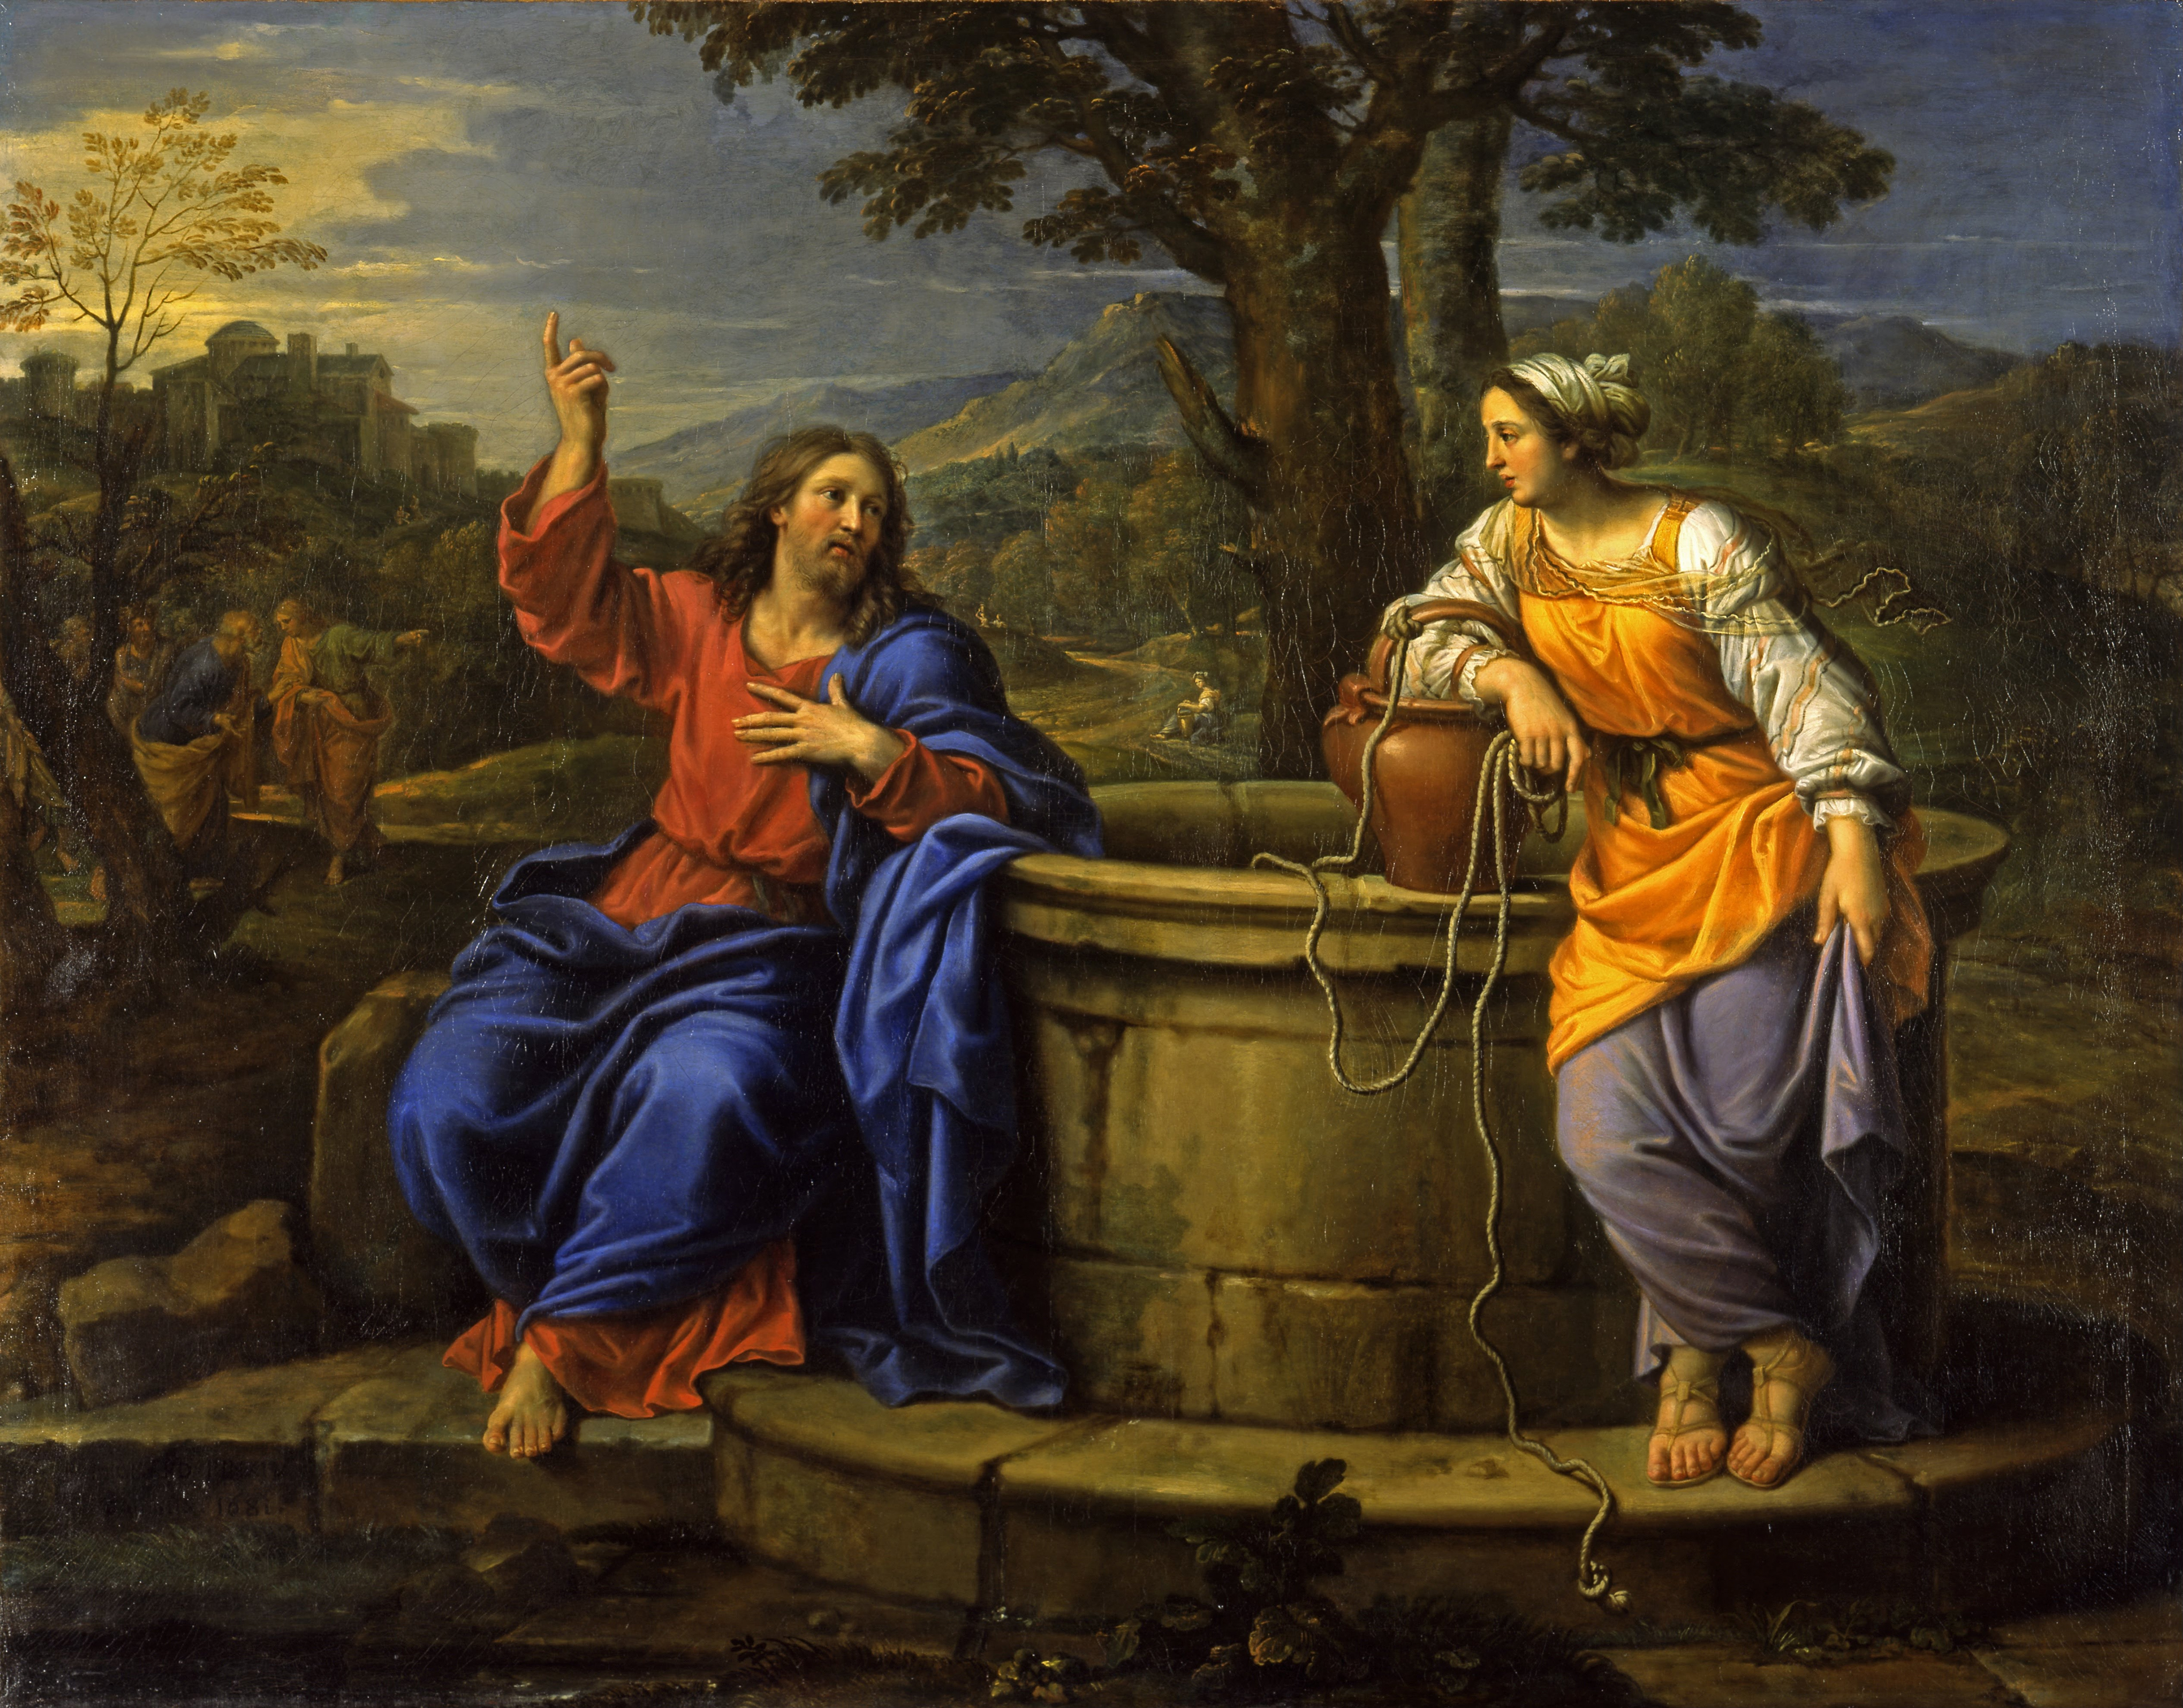 Christ and the Woman of Samaria - Pierre Mignard - Google Cultural Institute